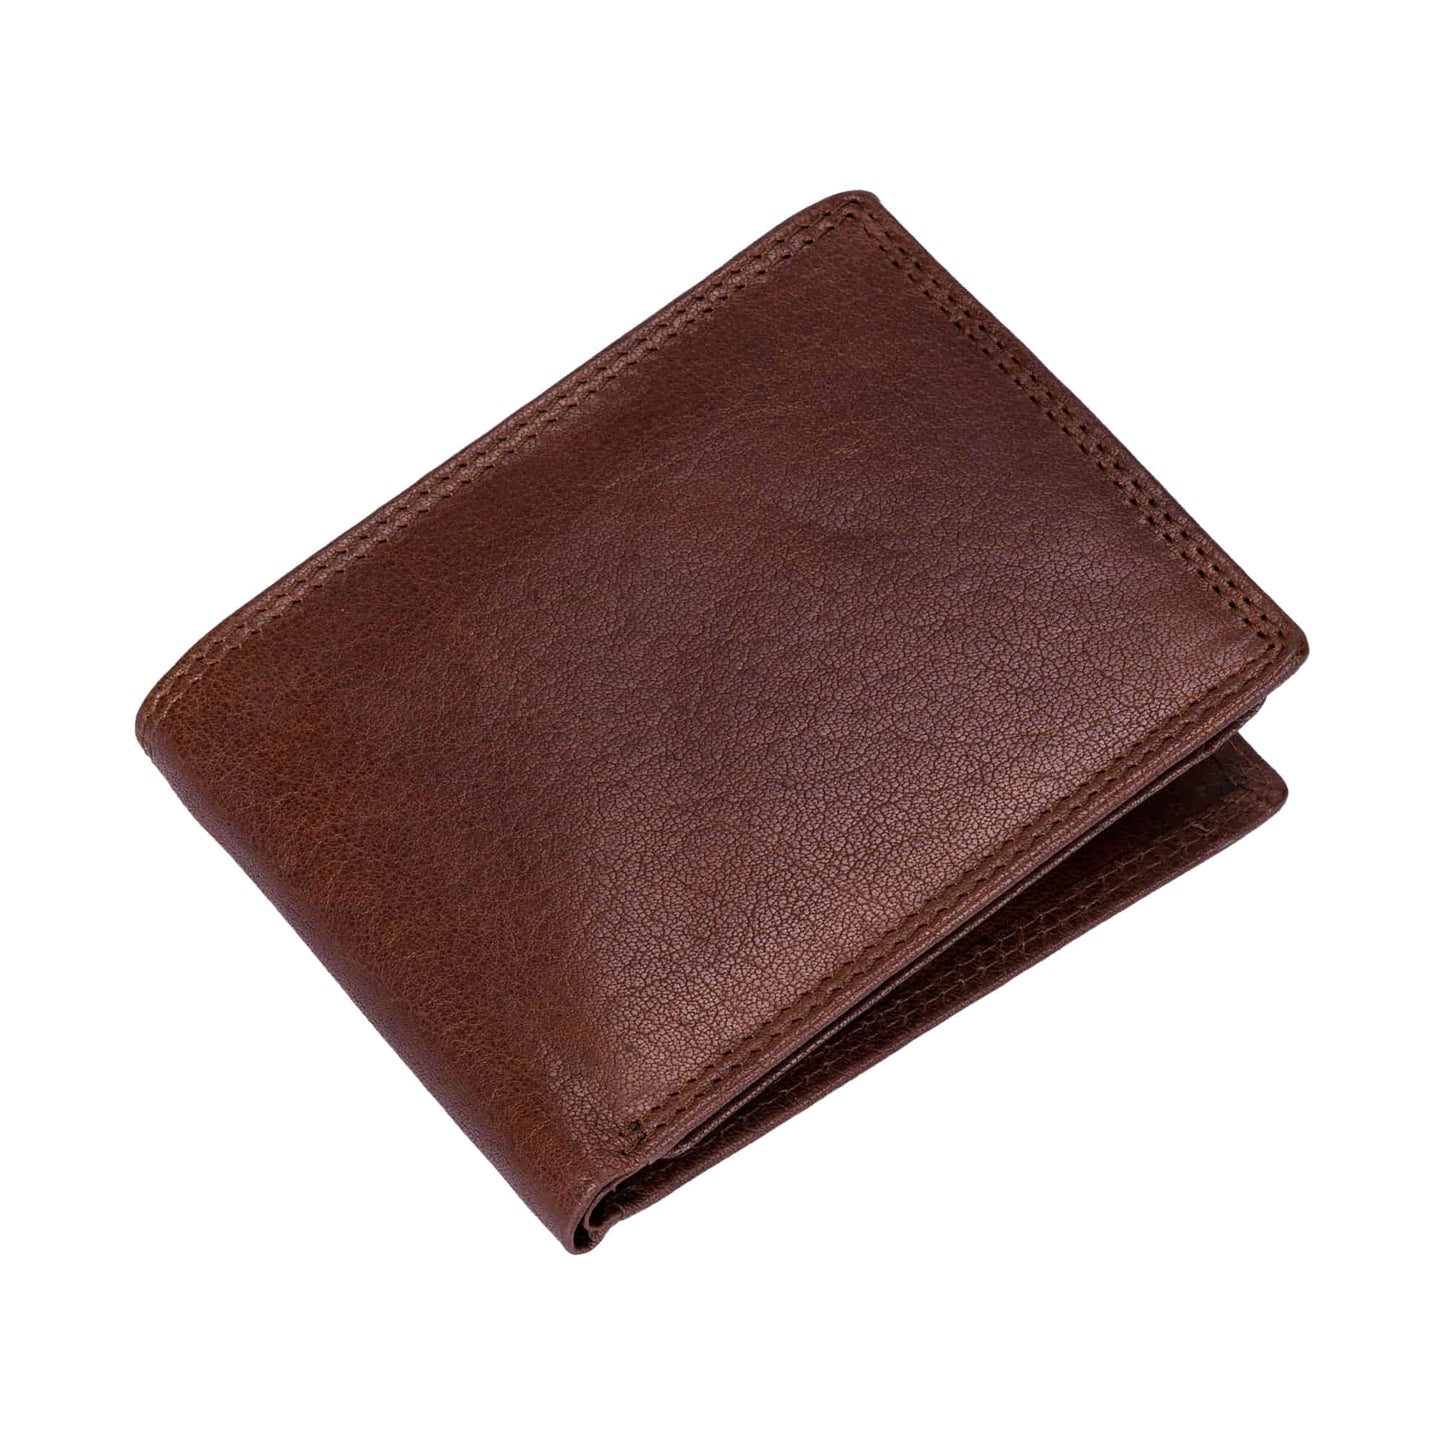 Style n Craft 301766 bifold wallet with side flap in dark brown color vintage leather with 2 tone effect - front angled closed view